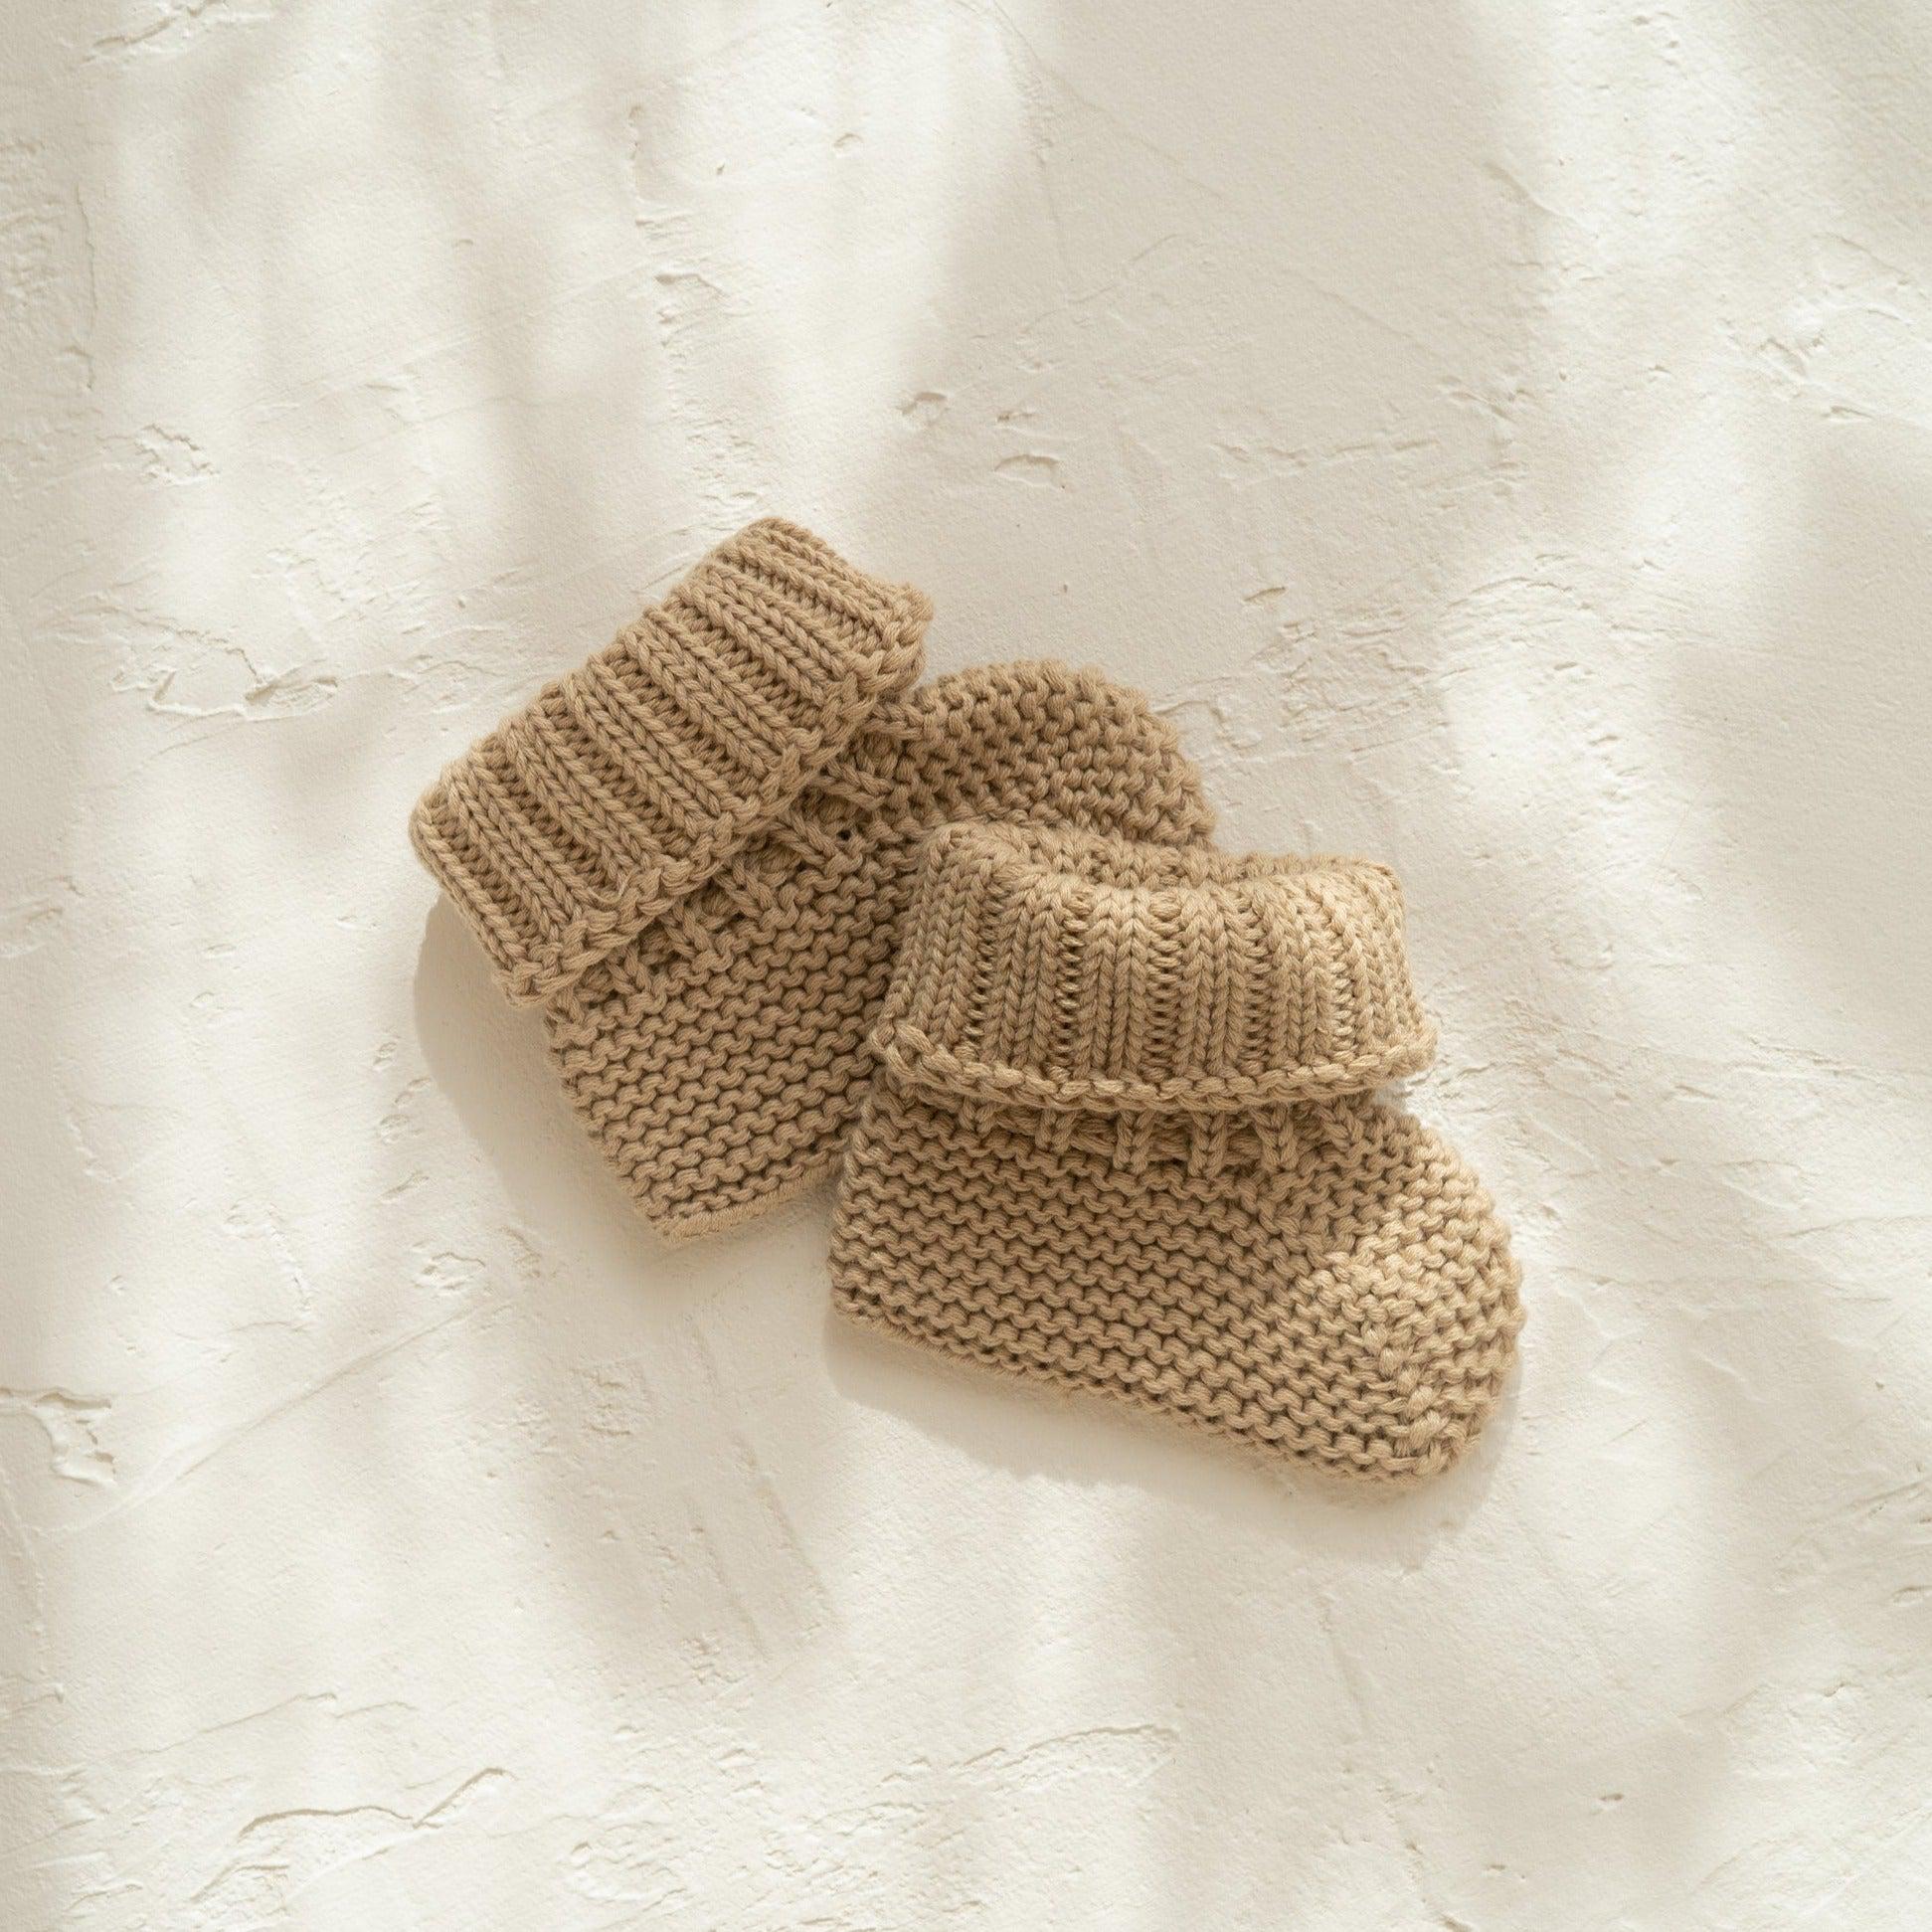 A pair of Illoura the Label organic cotton illoura baby booties in the color olive on a white surface.